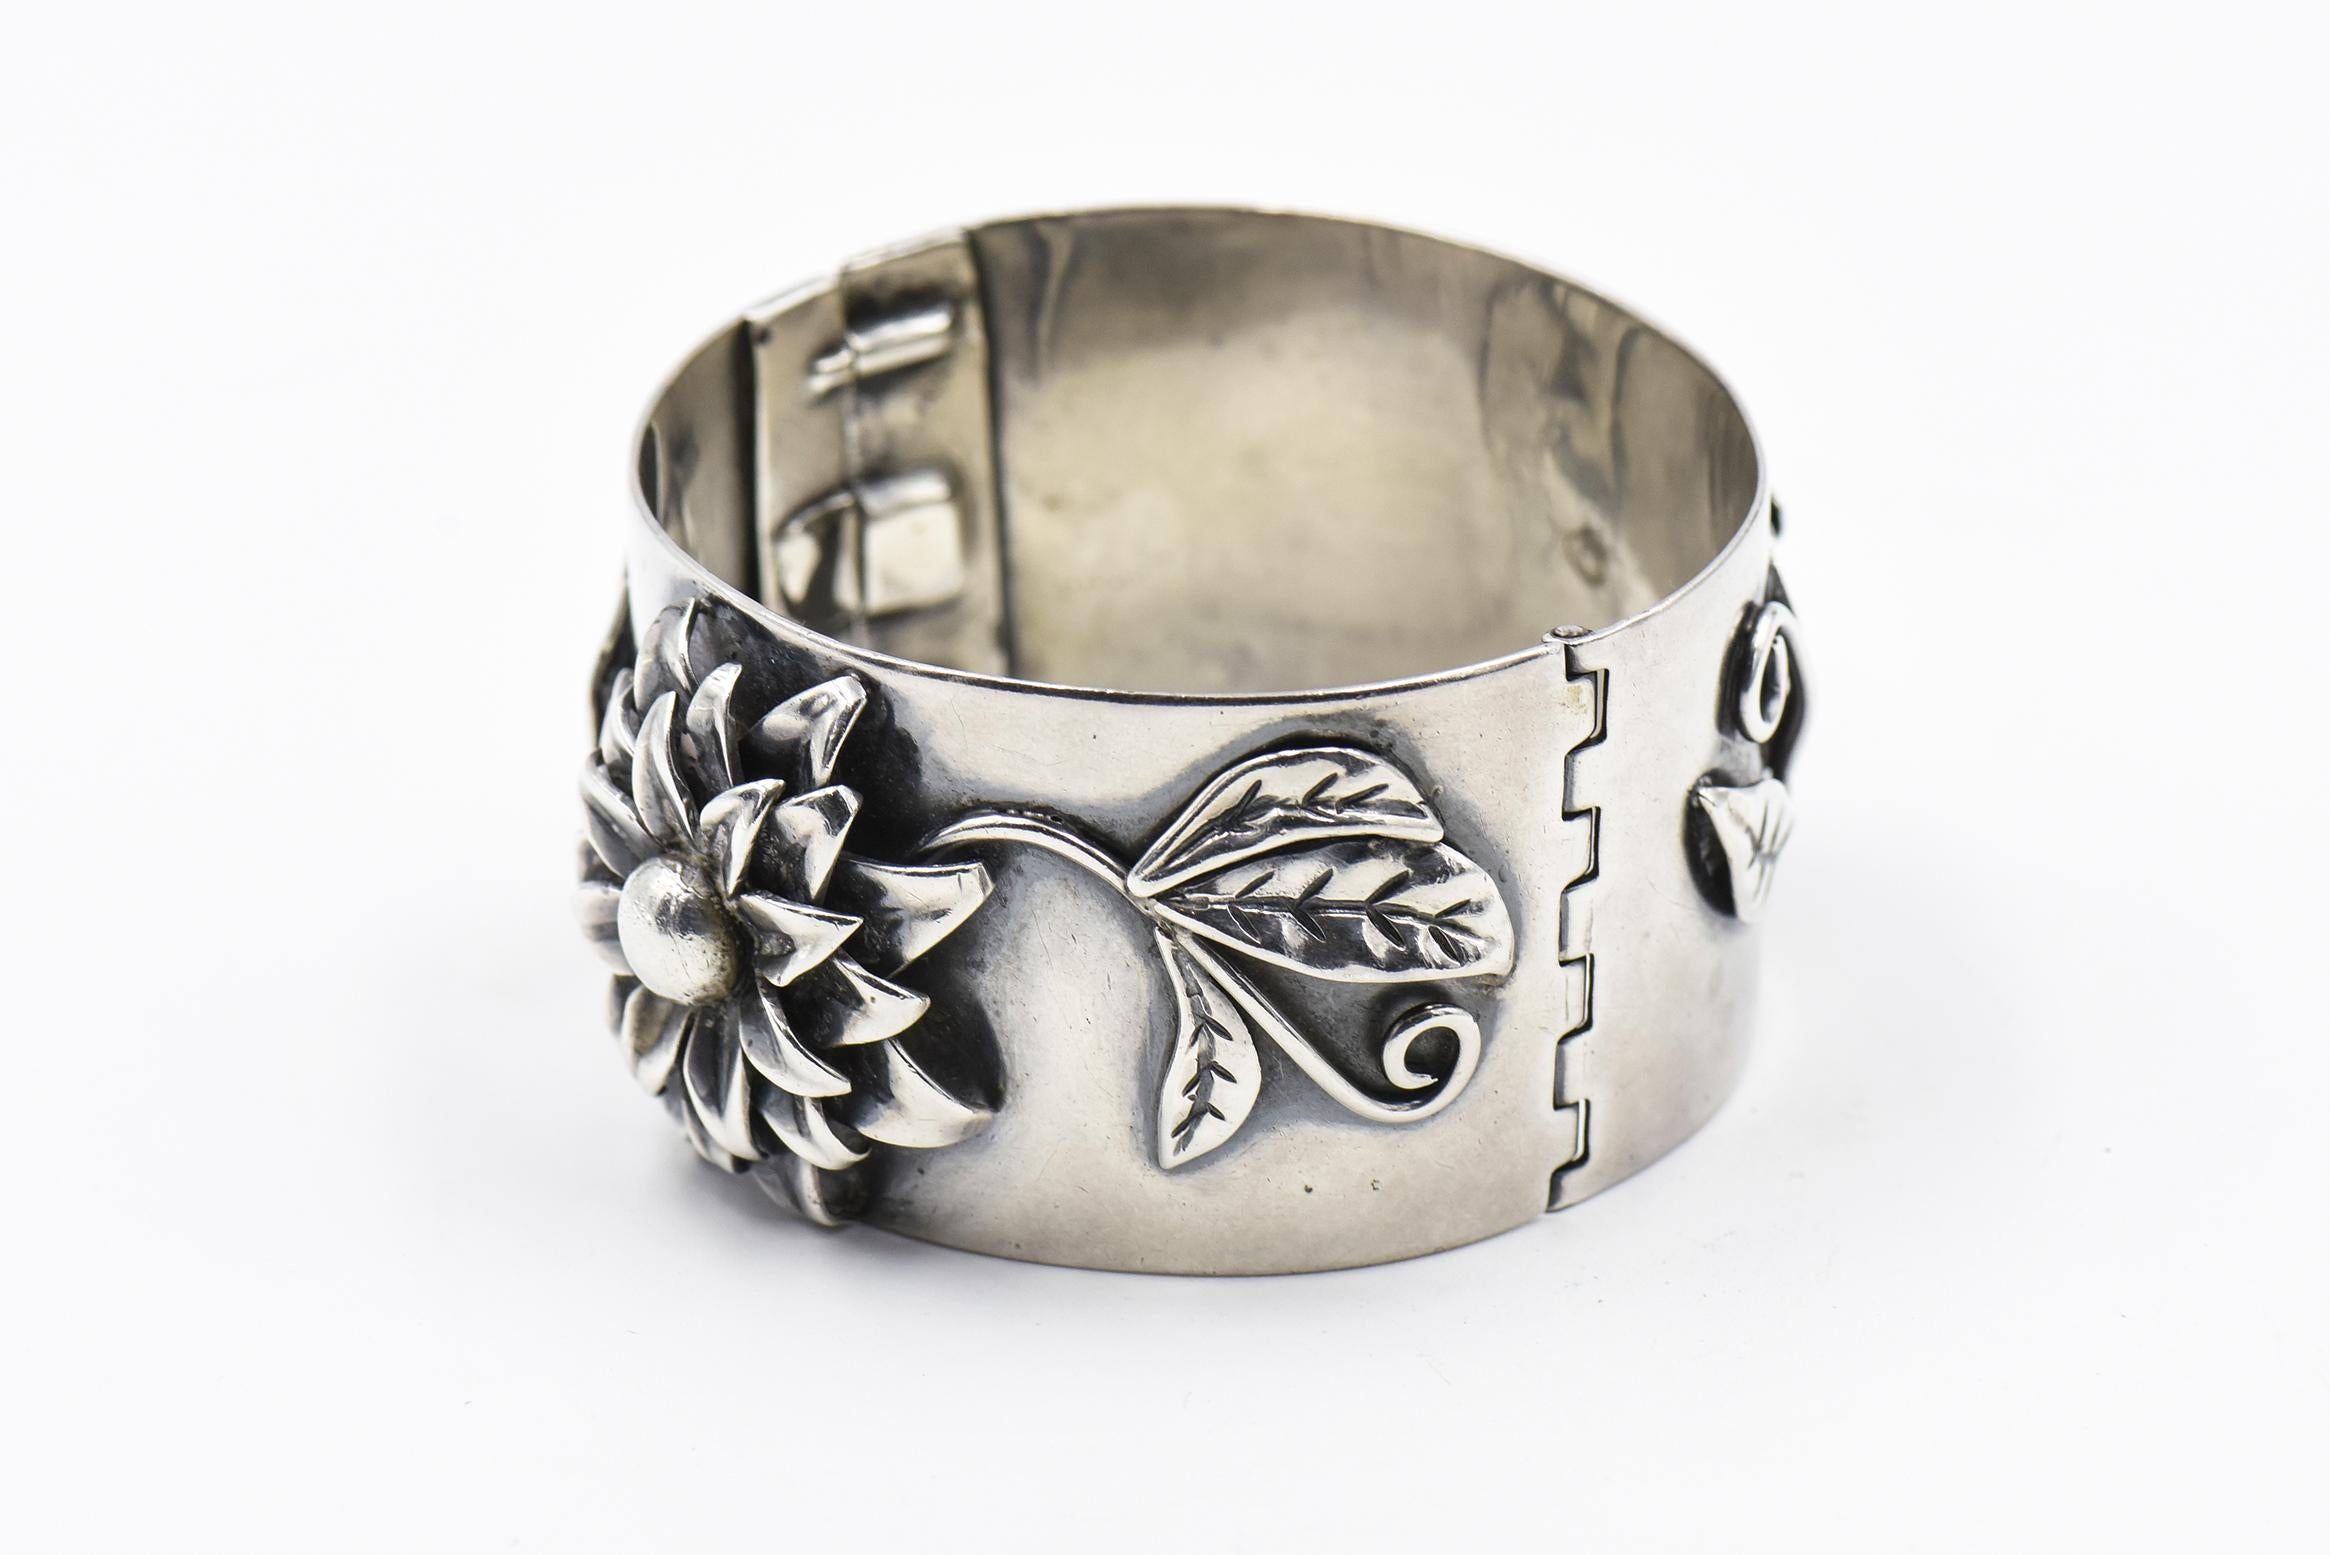 Handwrought sterling silver flower bangle by Heidi. Open by pulling open tab then lifting lever.  It has a safety chain also.  Marked sterling and signed by Heidi

Interior circumference 6.5